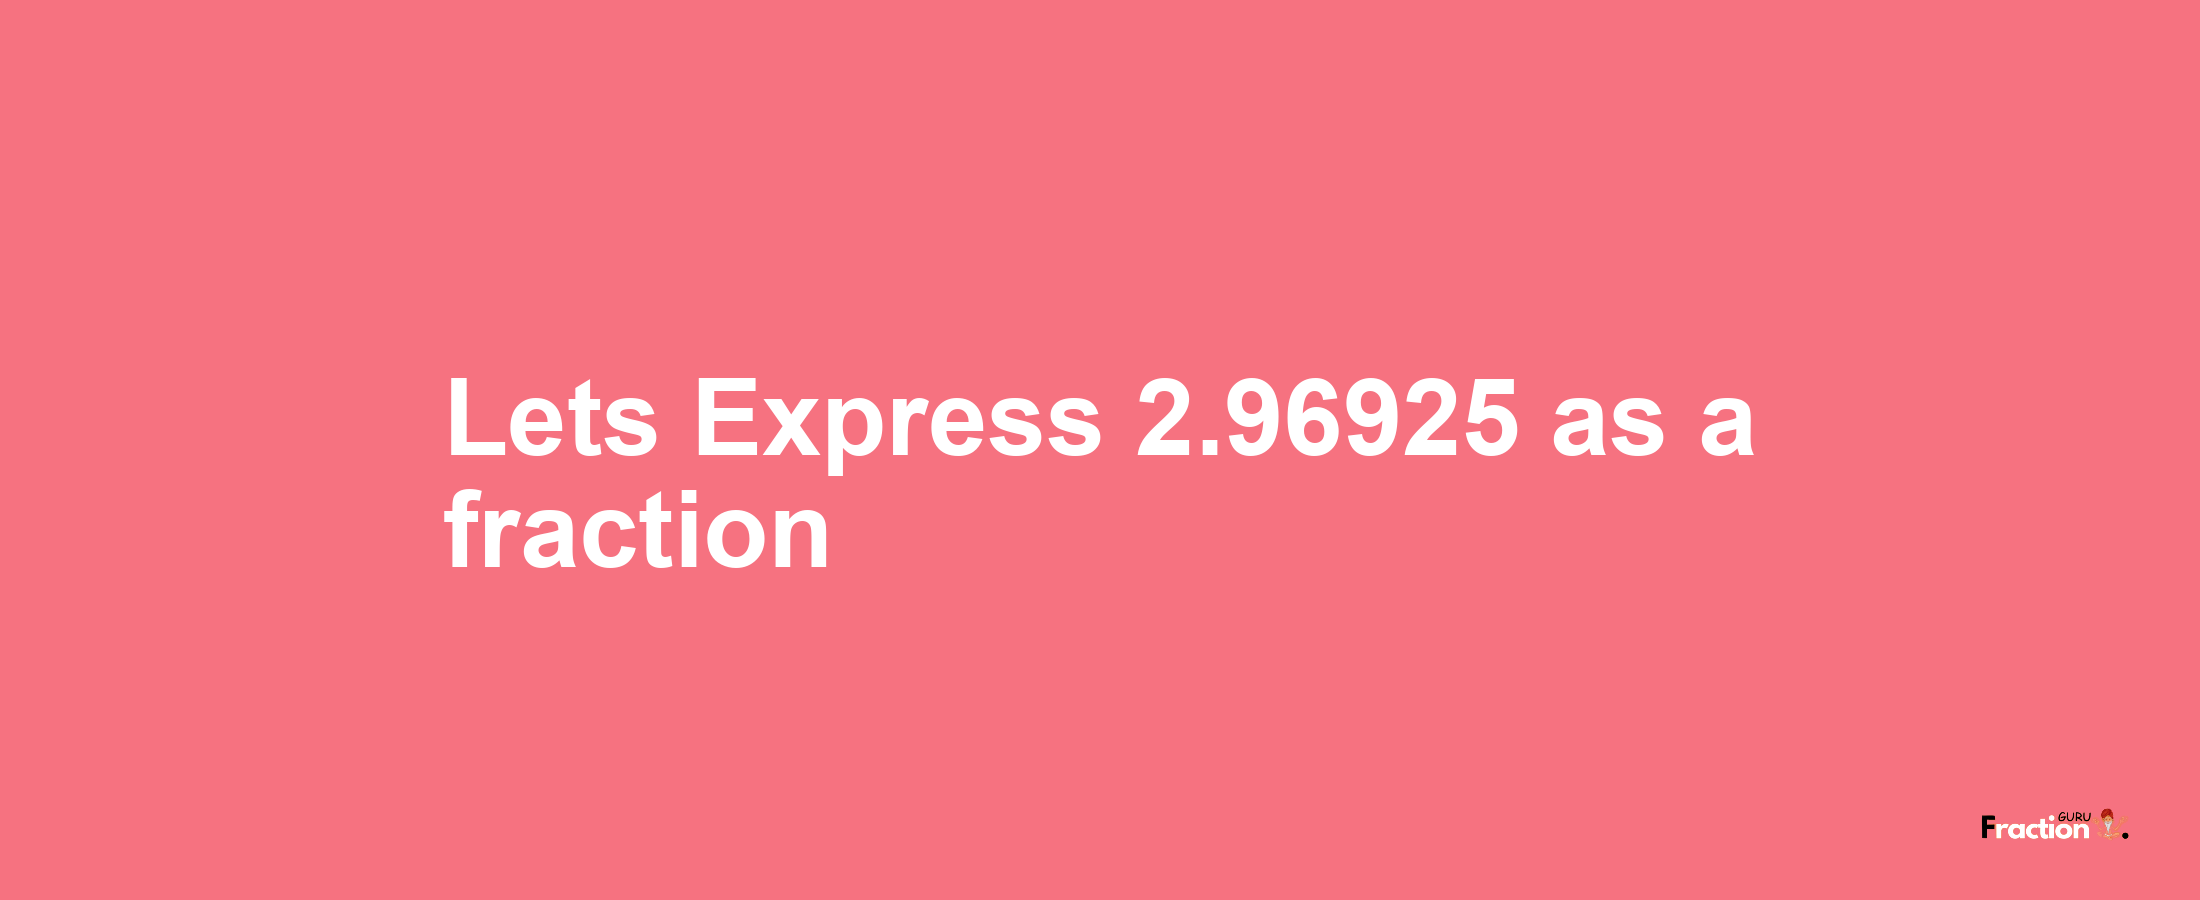 Lets Express 2.96925 as afraction